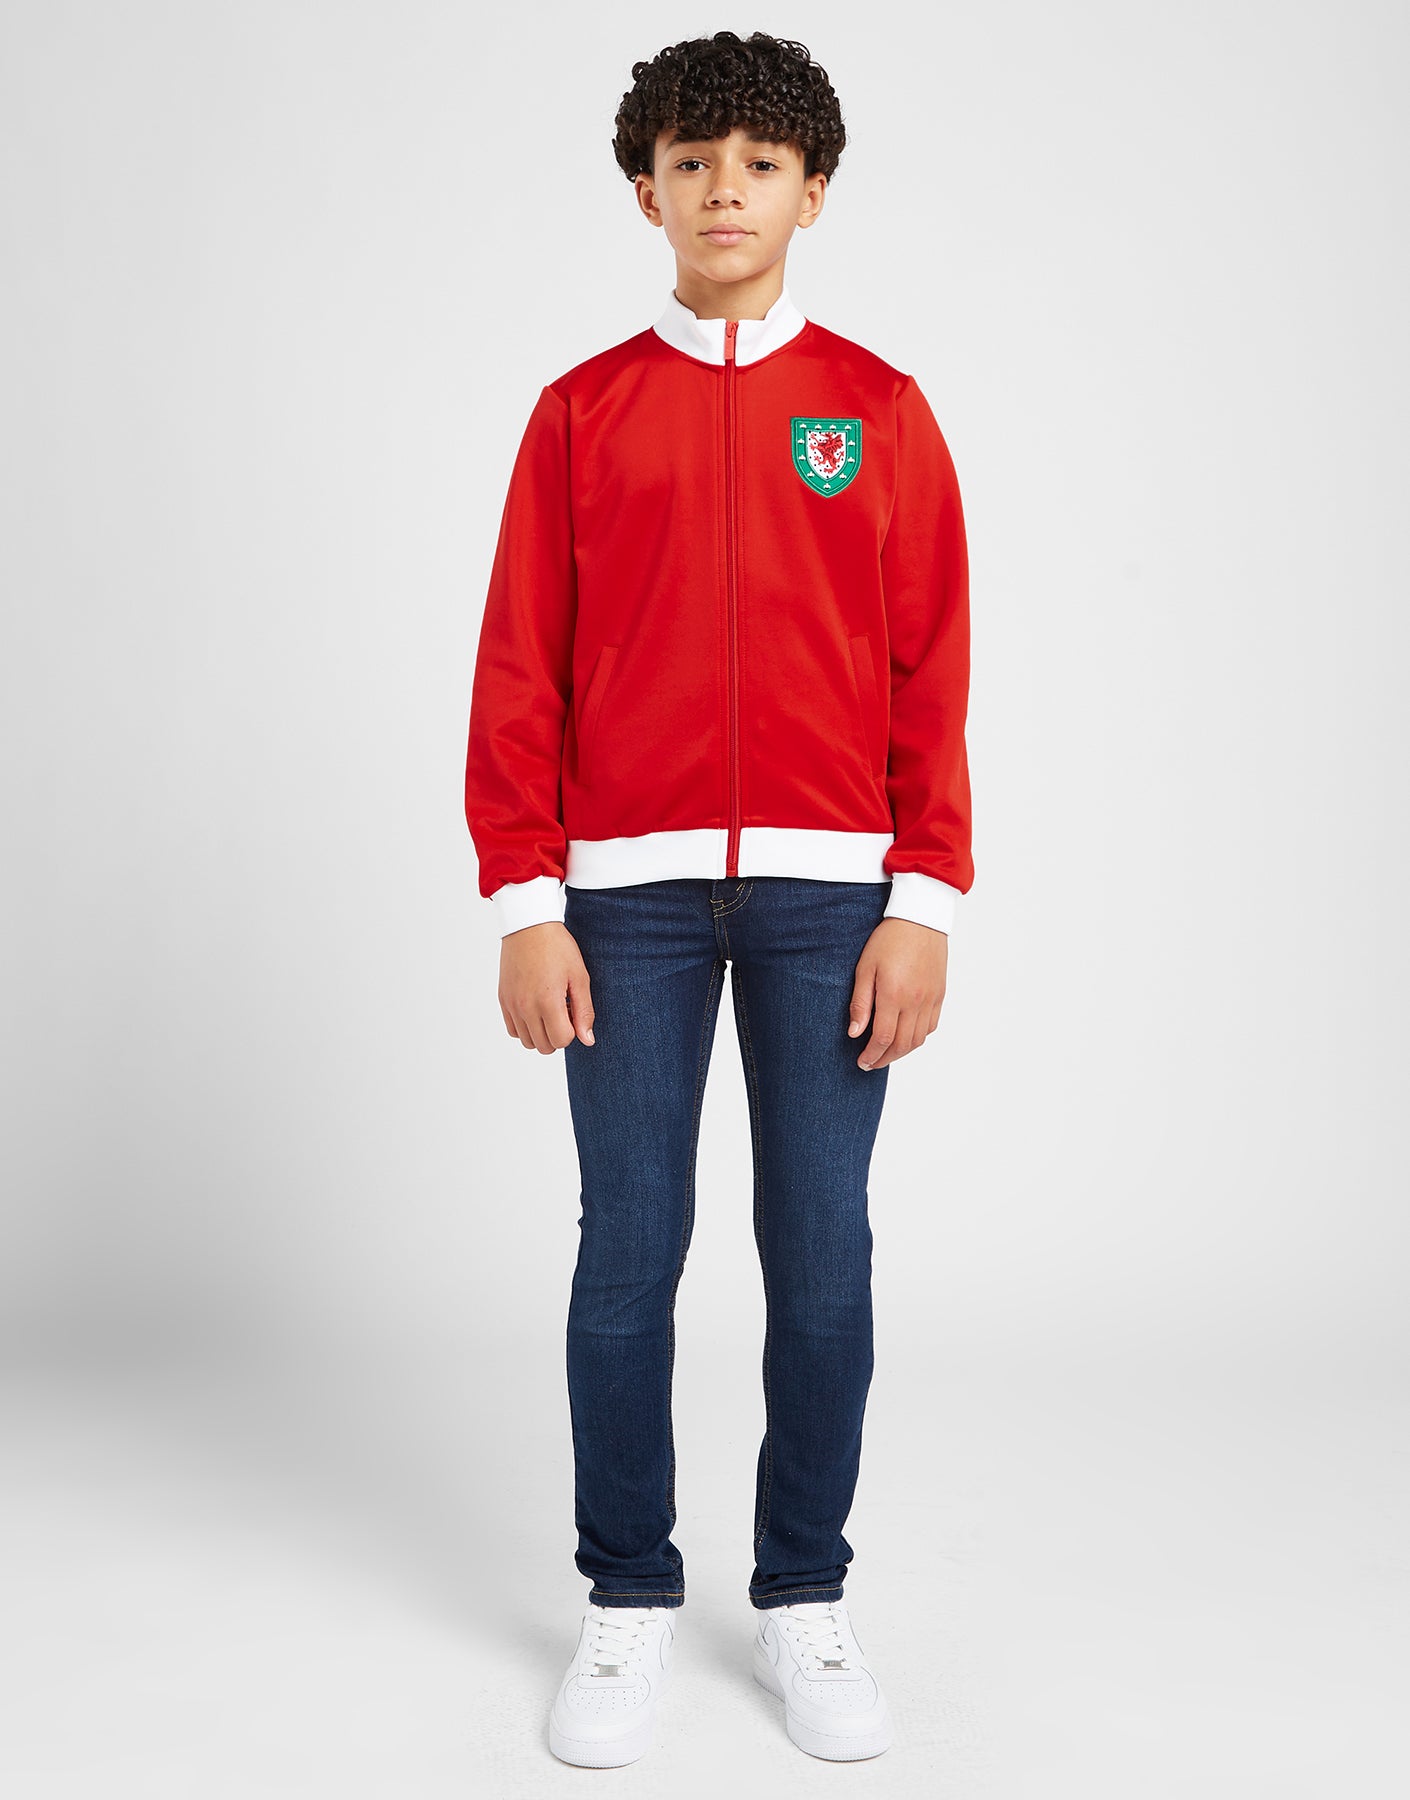 Official Team Wales Kids Retro Track Top - Red - The World Football Store